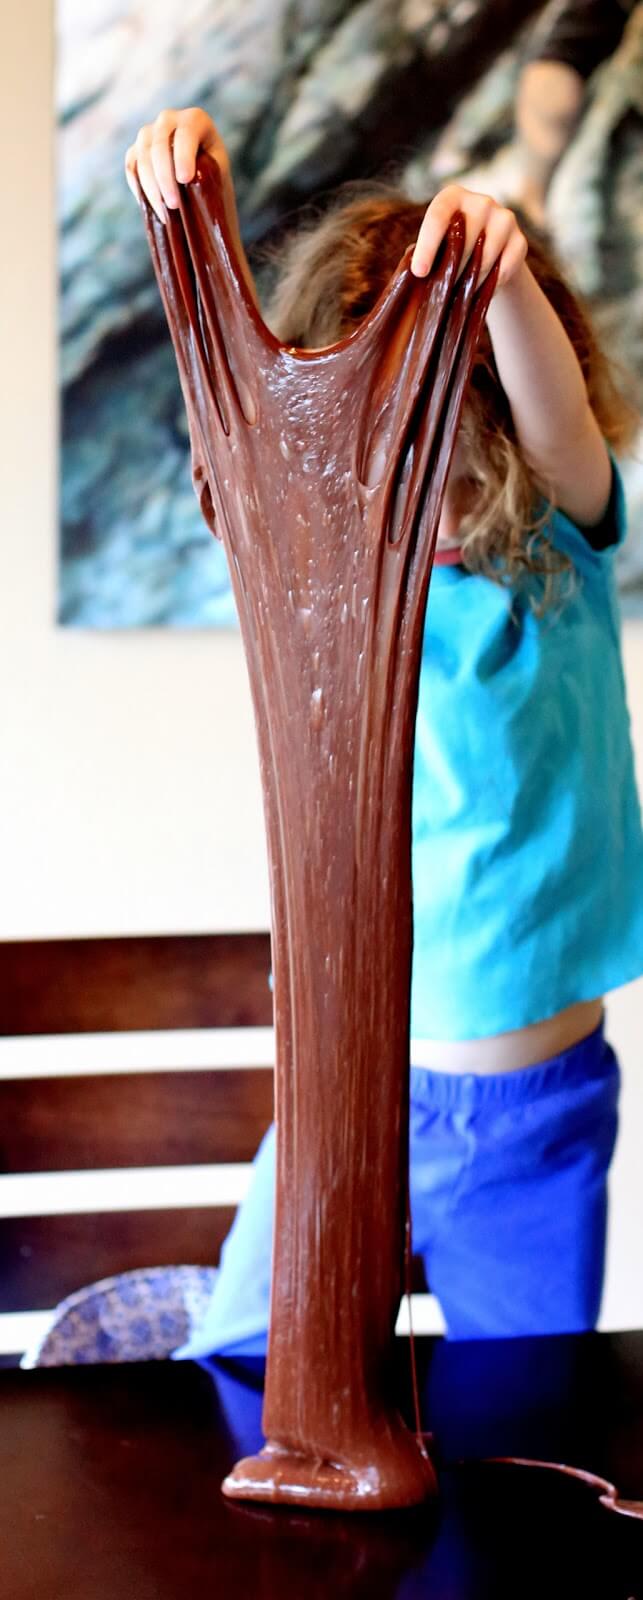 Chocolate Stretchy Slime Recipe from Fun at Home with Kids